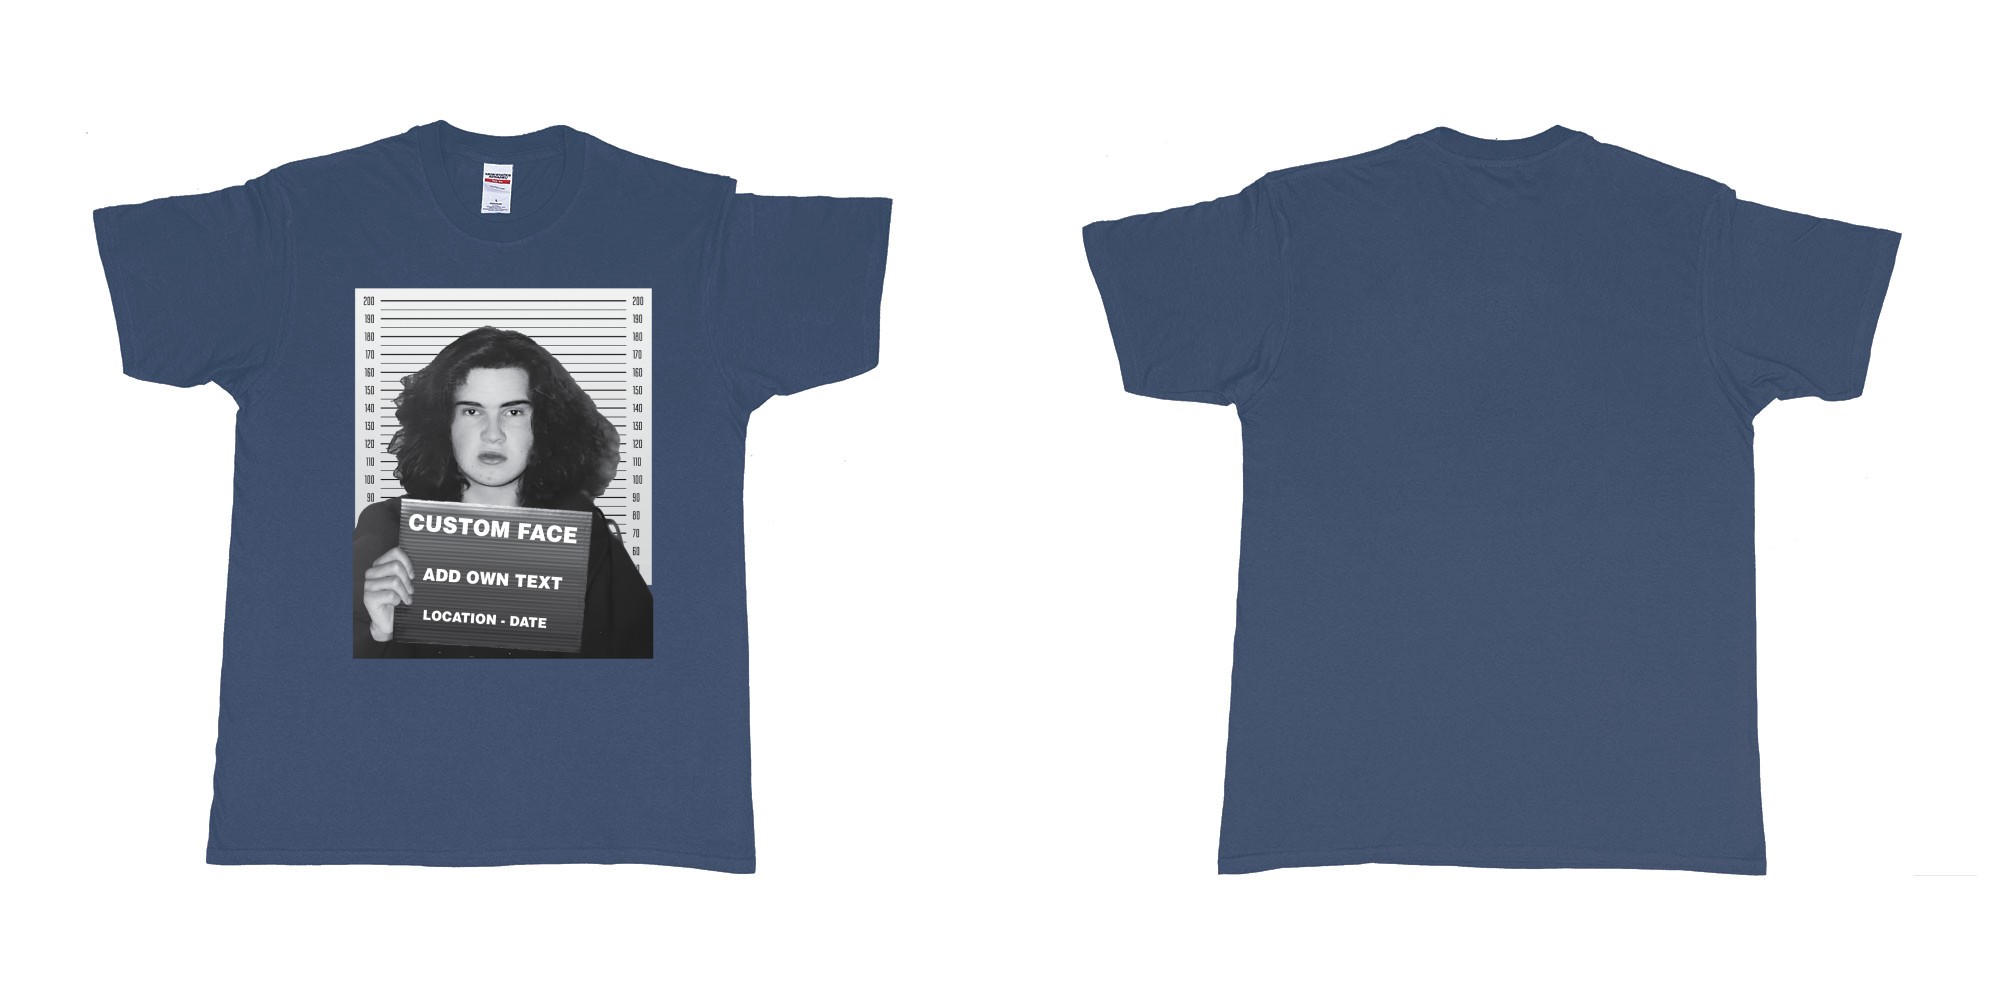 Custom tshirt design jimmy carr arrested bali mugshot in fabric color navy choice your own text made in Bali by The Pirate Way